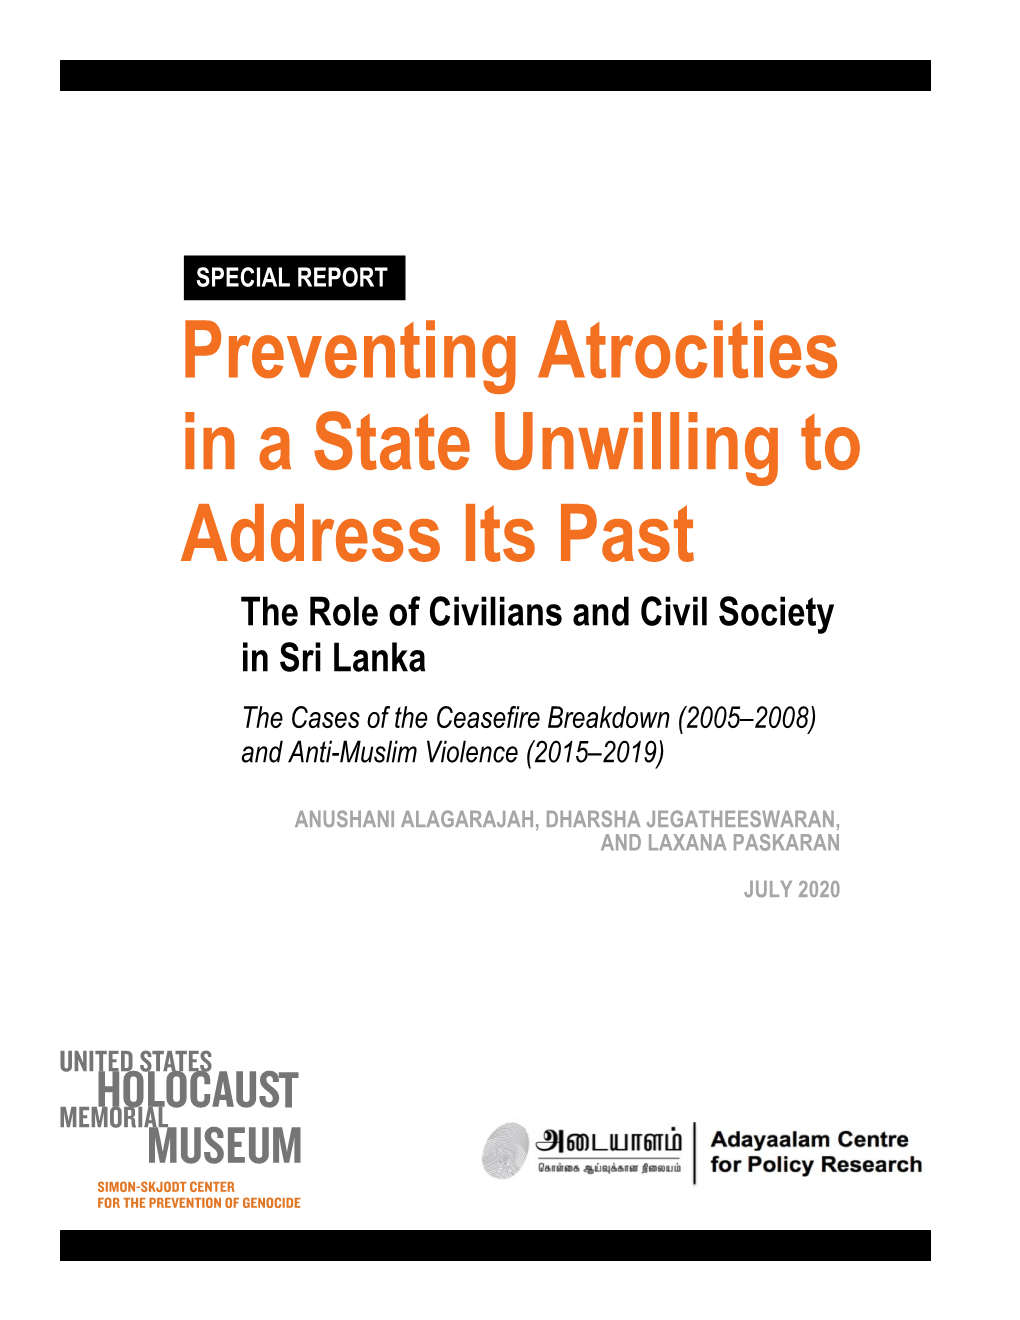 Preventing Atrocities in a State Unwilling to Address Its Past